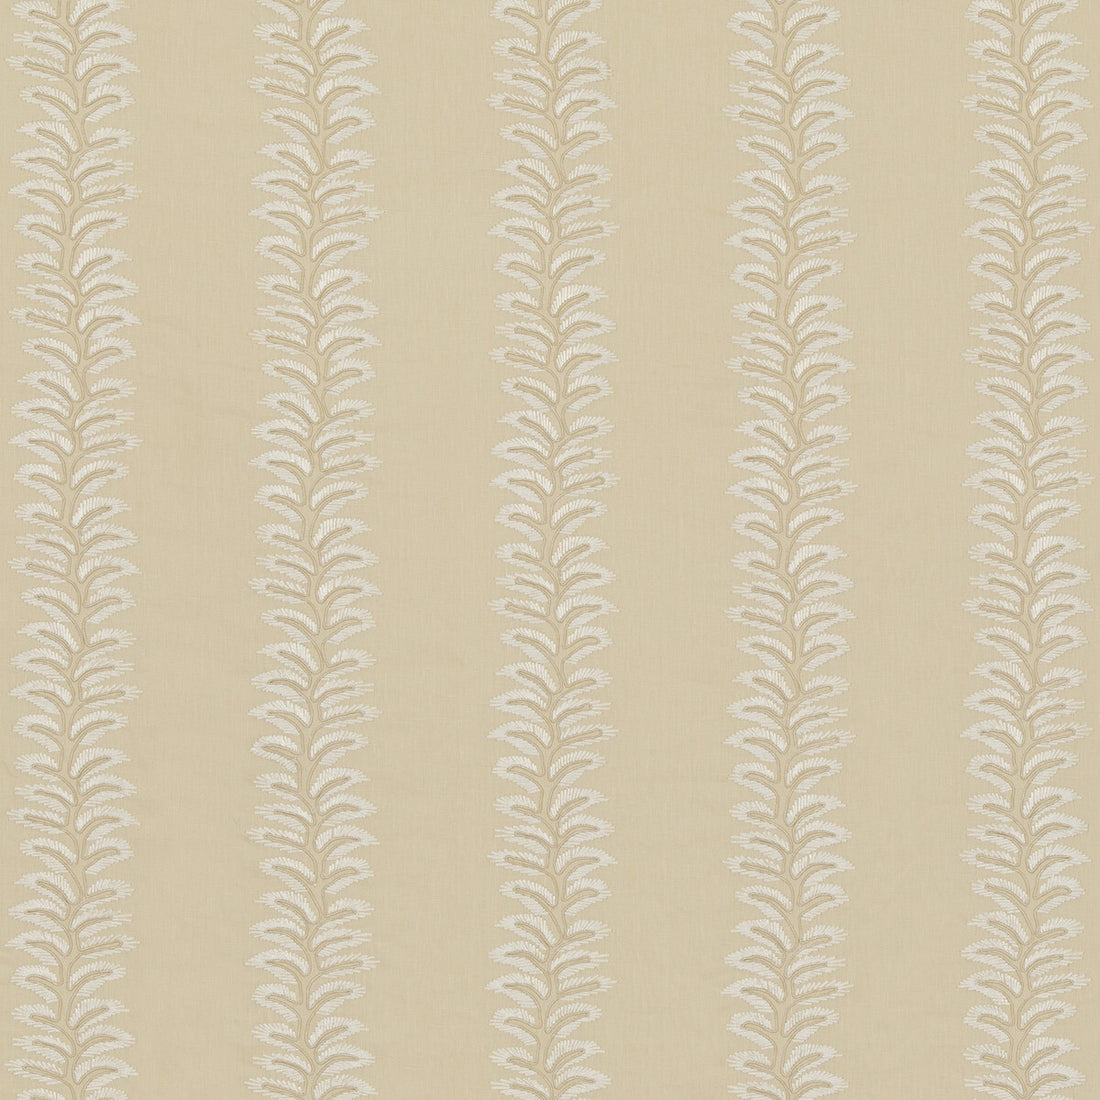 New Bradbourne fabric in cream color - pattern BF10946.120.0 - by G P &amp; J Baker in the Ashmore collection